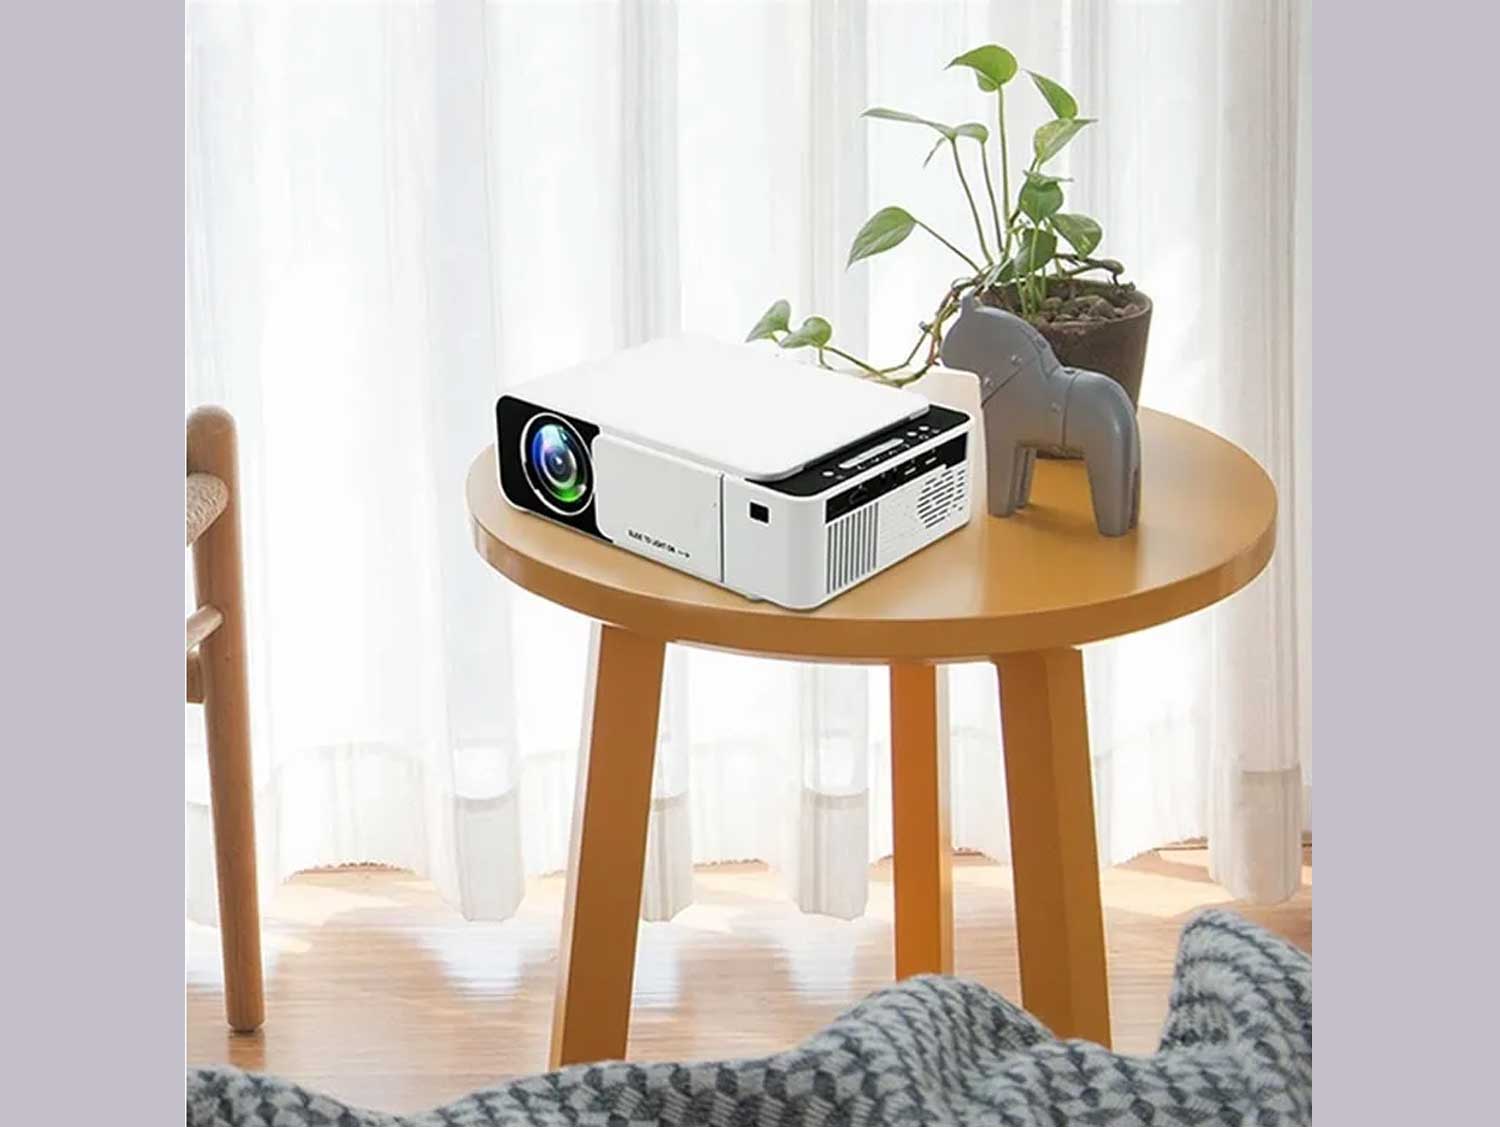 T5S Projector with Android support